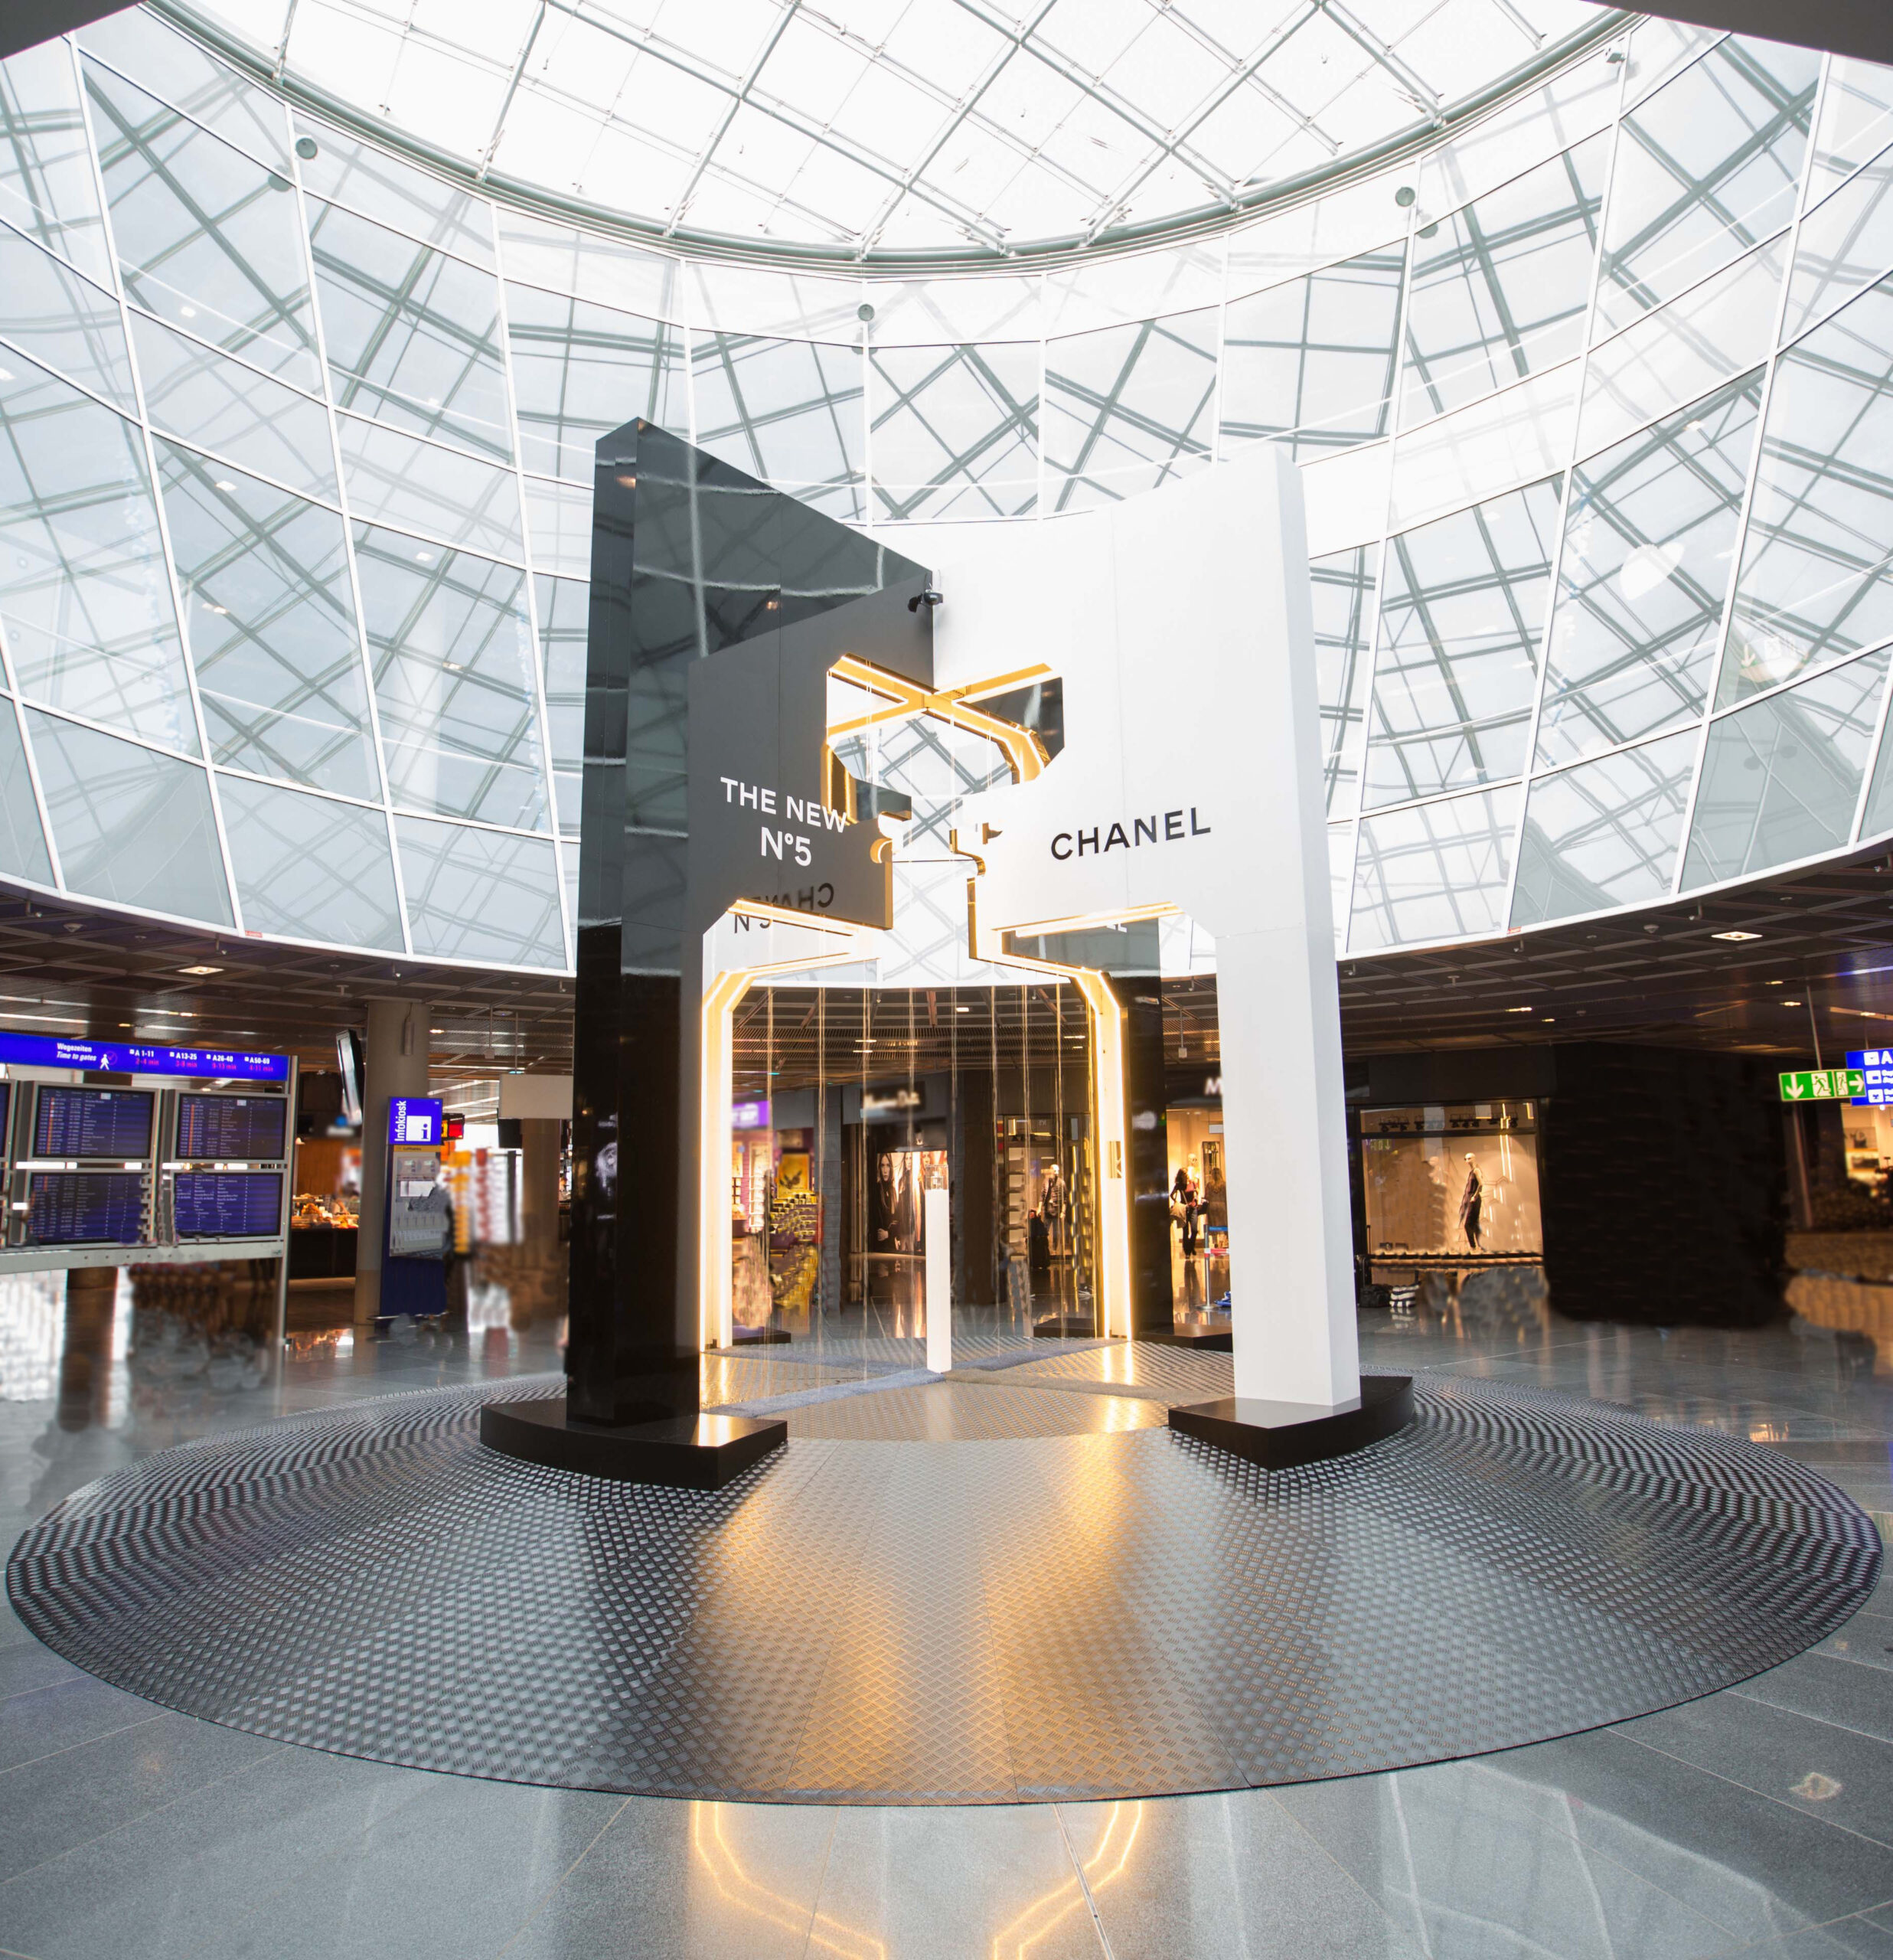 Any new fragrance from the house of Chanel is big news in the beauty world and to mark this event Chanel chose Frankfurt Airport to showcase N°5 L’Eau to travel retail customers 